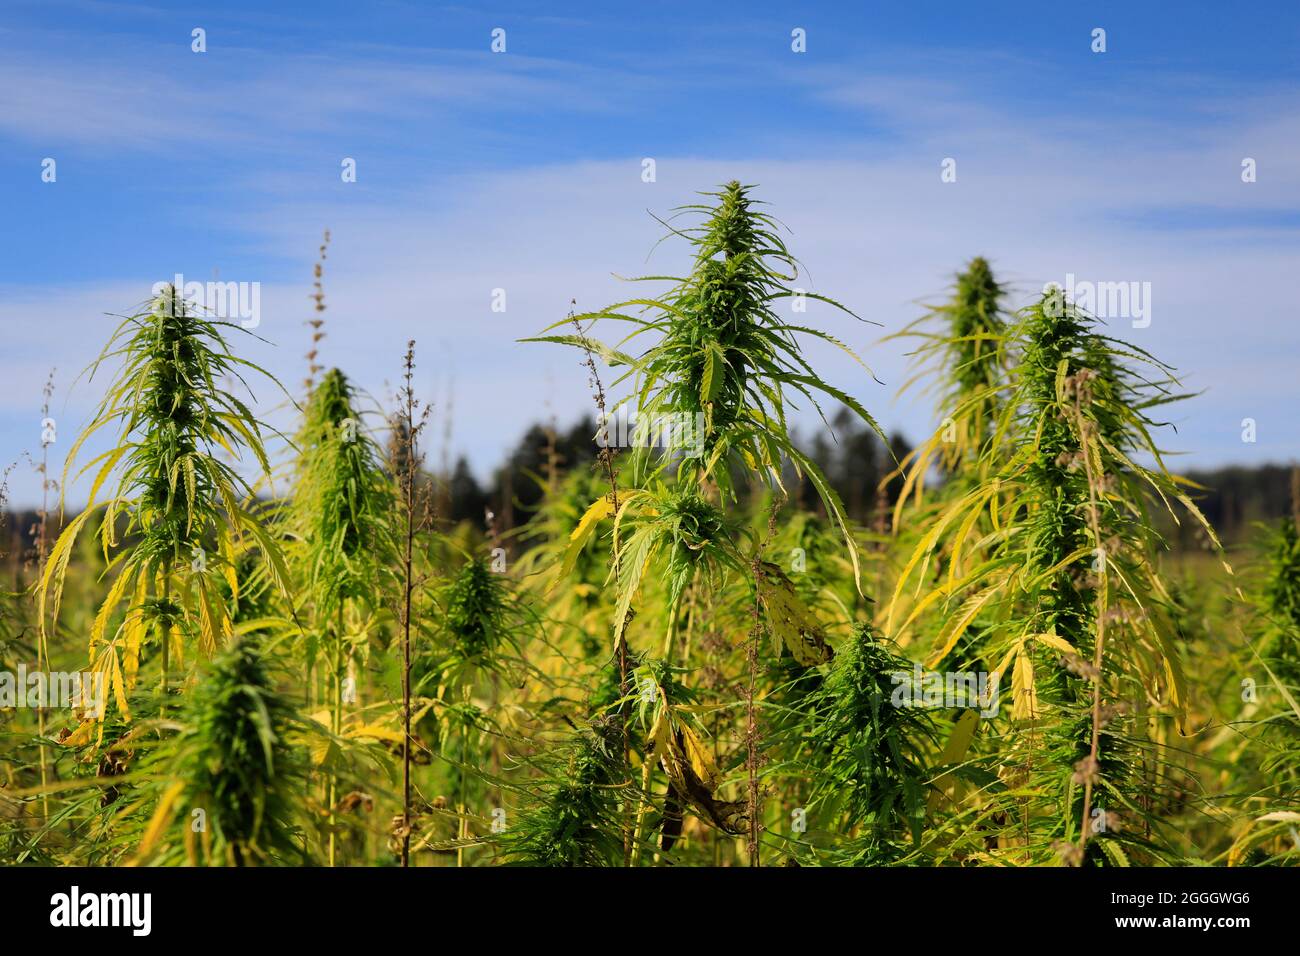 Industrial hemp, Cannabis sativa, of Finola variety growing in Finland in August. The low THC agricultural hemp is used to produce hemp seed oil. Stock Photo